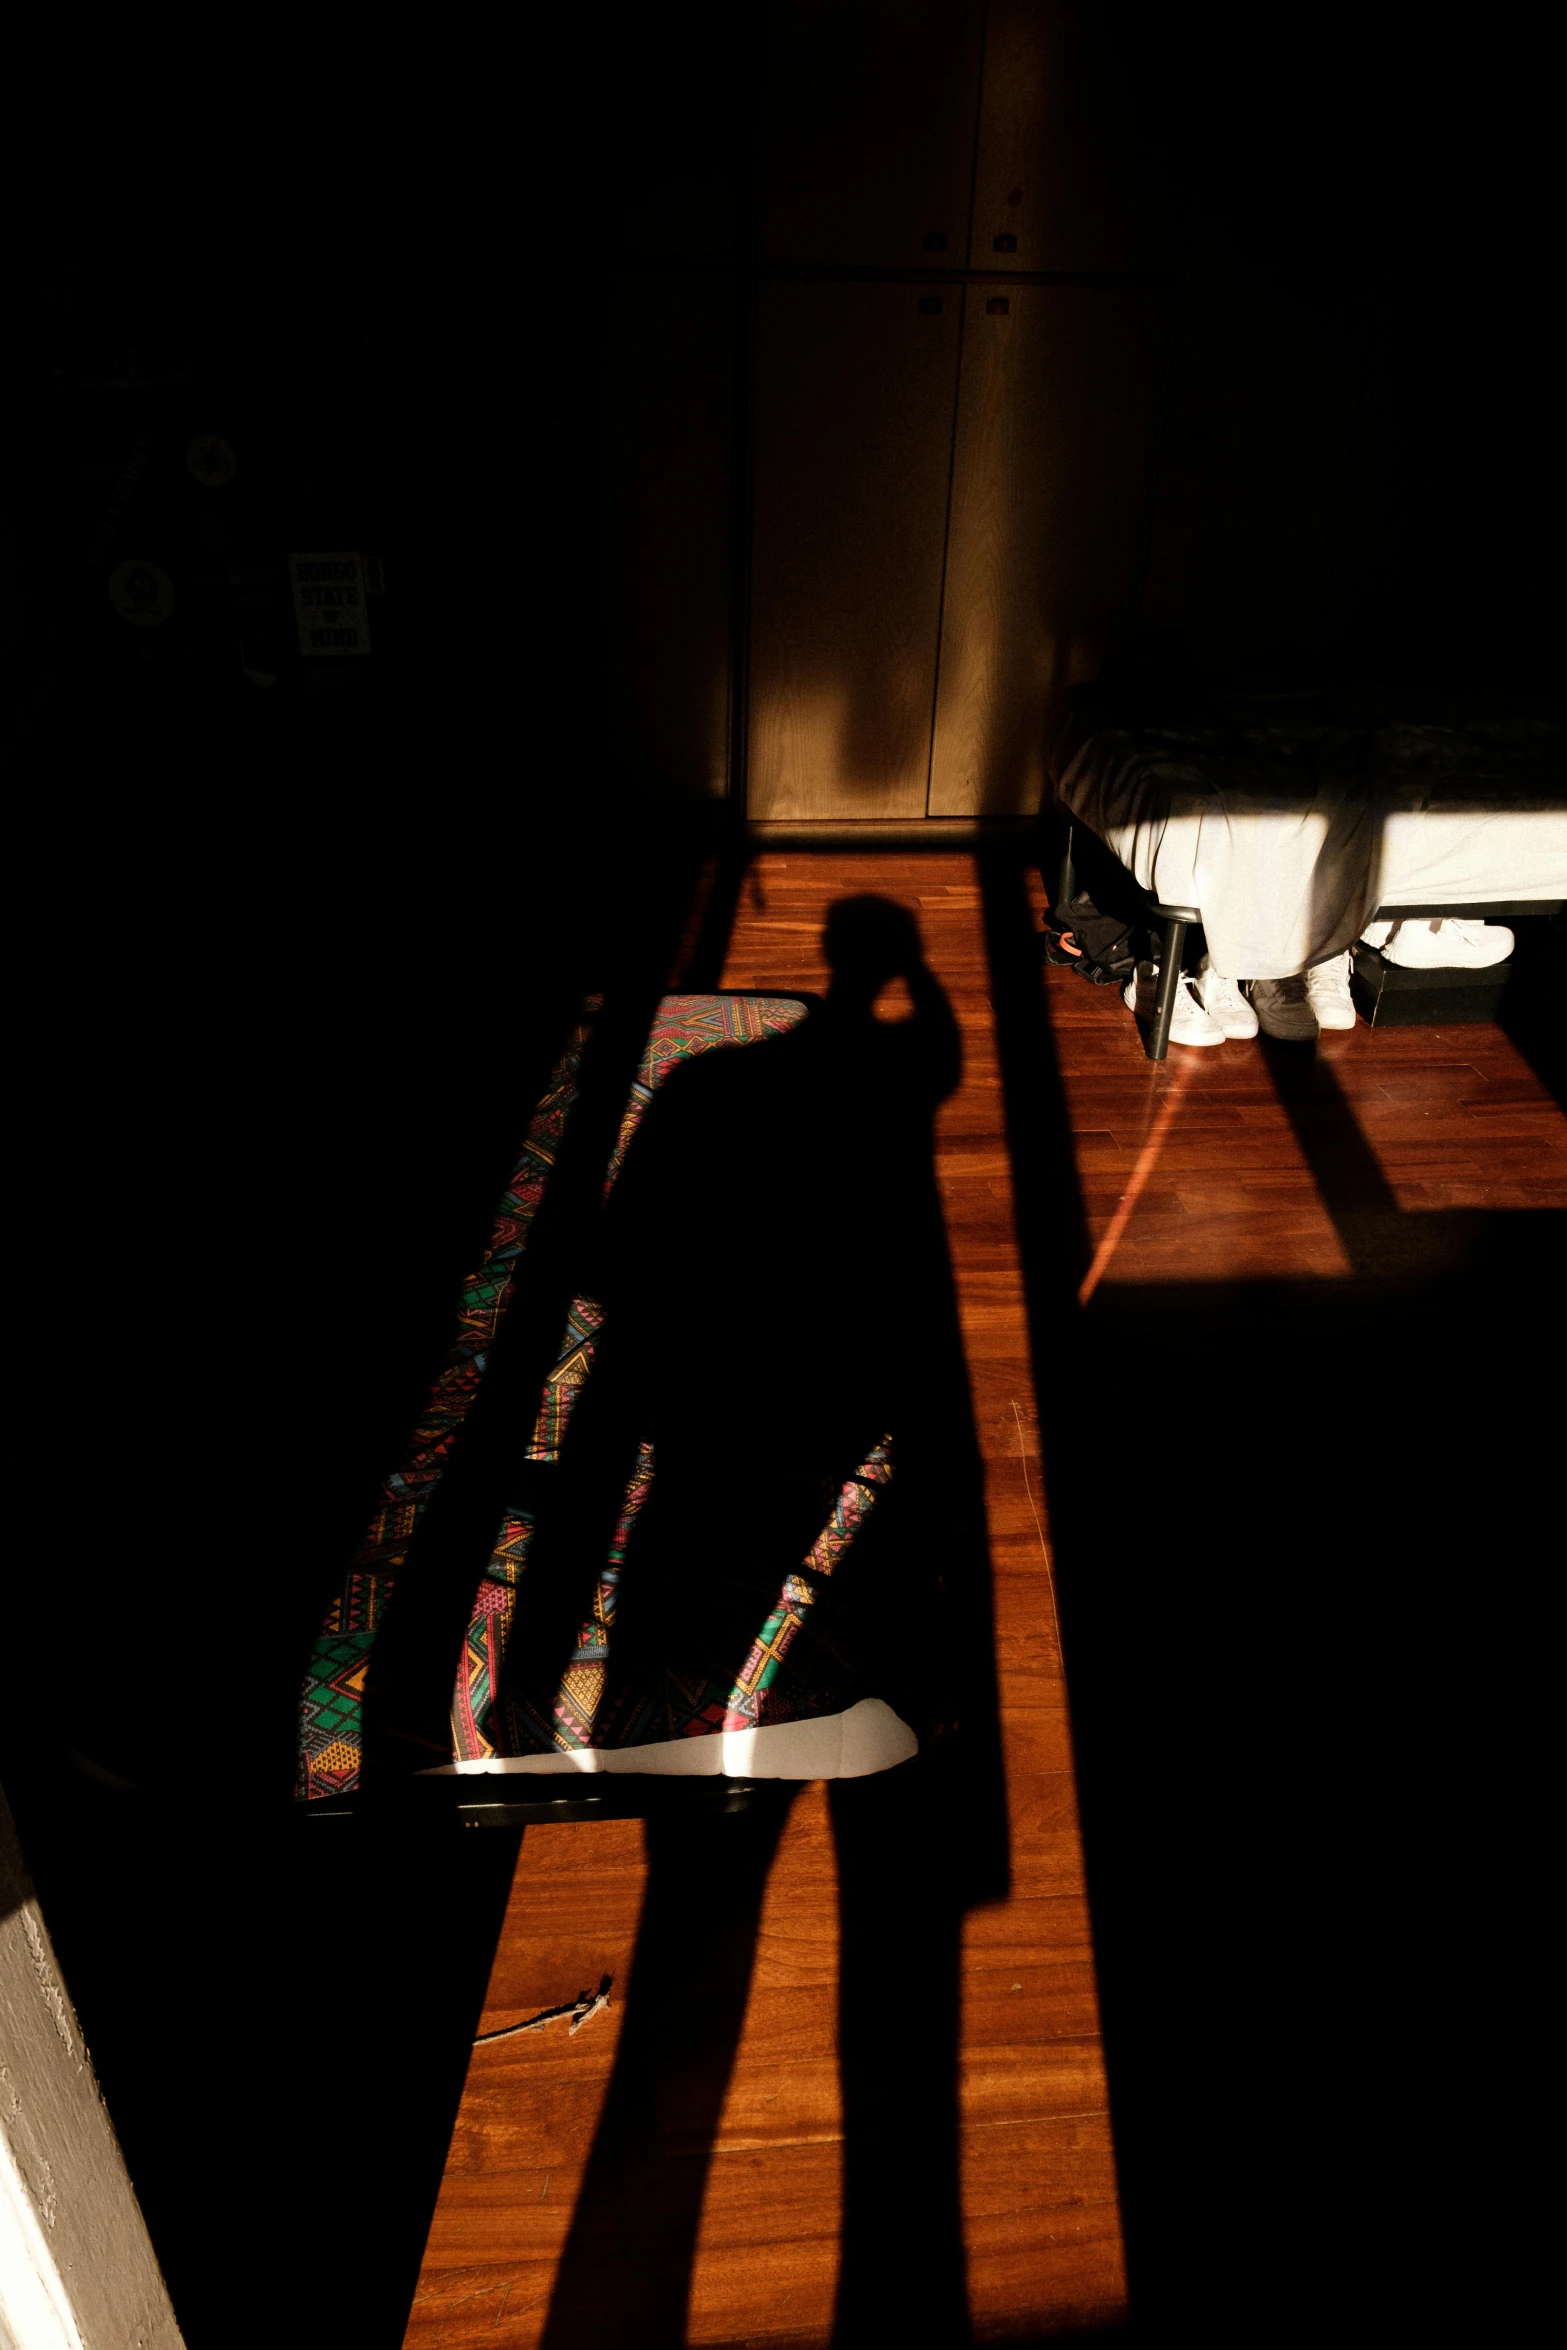 a person in the shadow and sunlight on a wooden floor